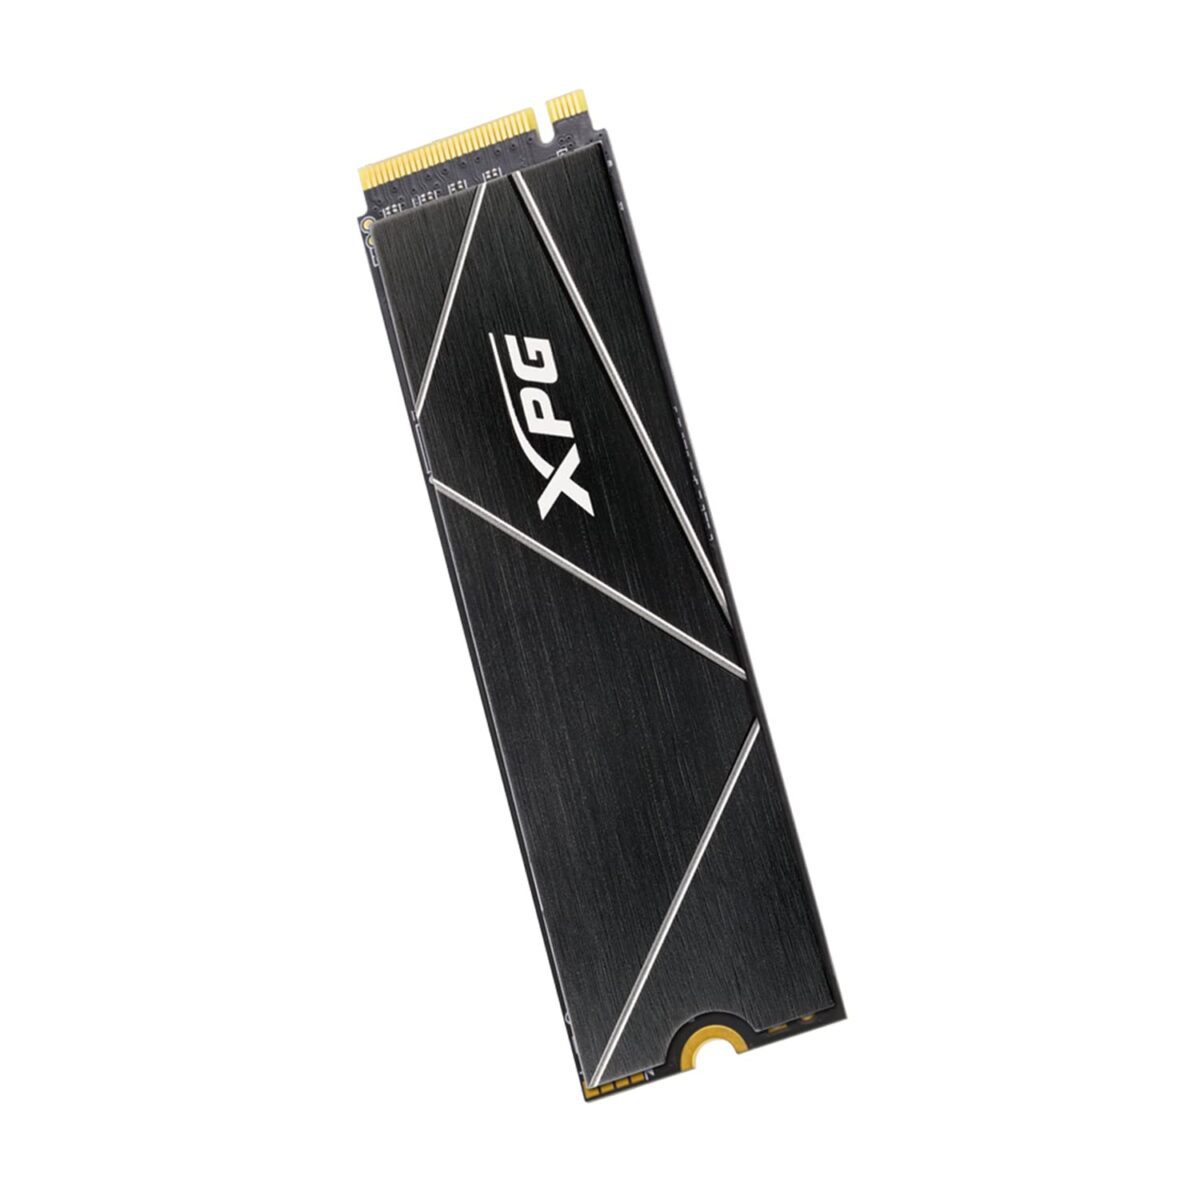 XPG GAMMIX S70 Blade M.2 NVME 1TB PCIe Gen4x4 2280 Internal Solid State Drive/SSD, Read/Write Up to 7,400/6800 MB/s – AGAMMIXS70B-1T-CS Compatible with PC, Laptop and Play Station 5